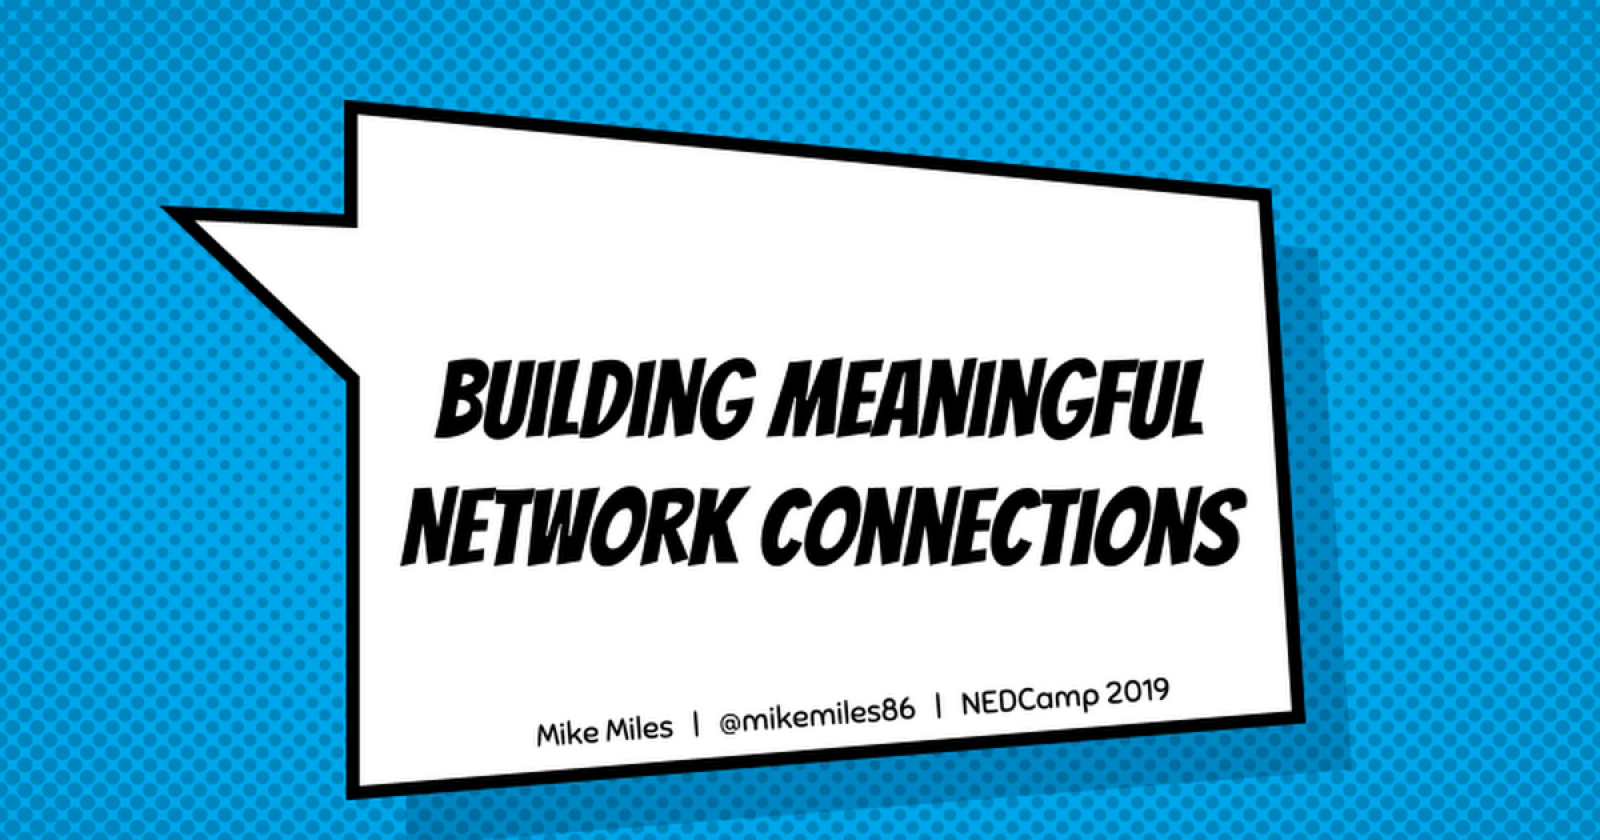 Building Meaningful Network Connections